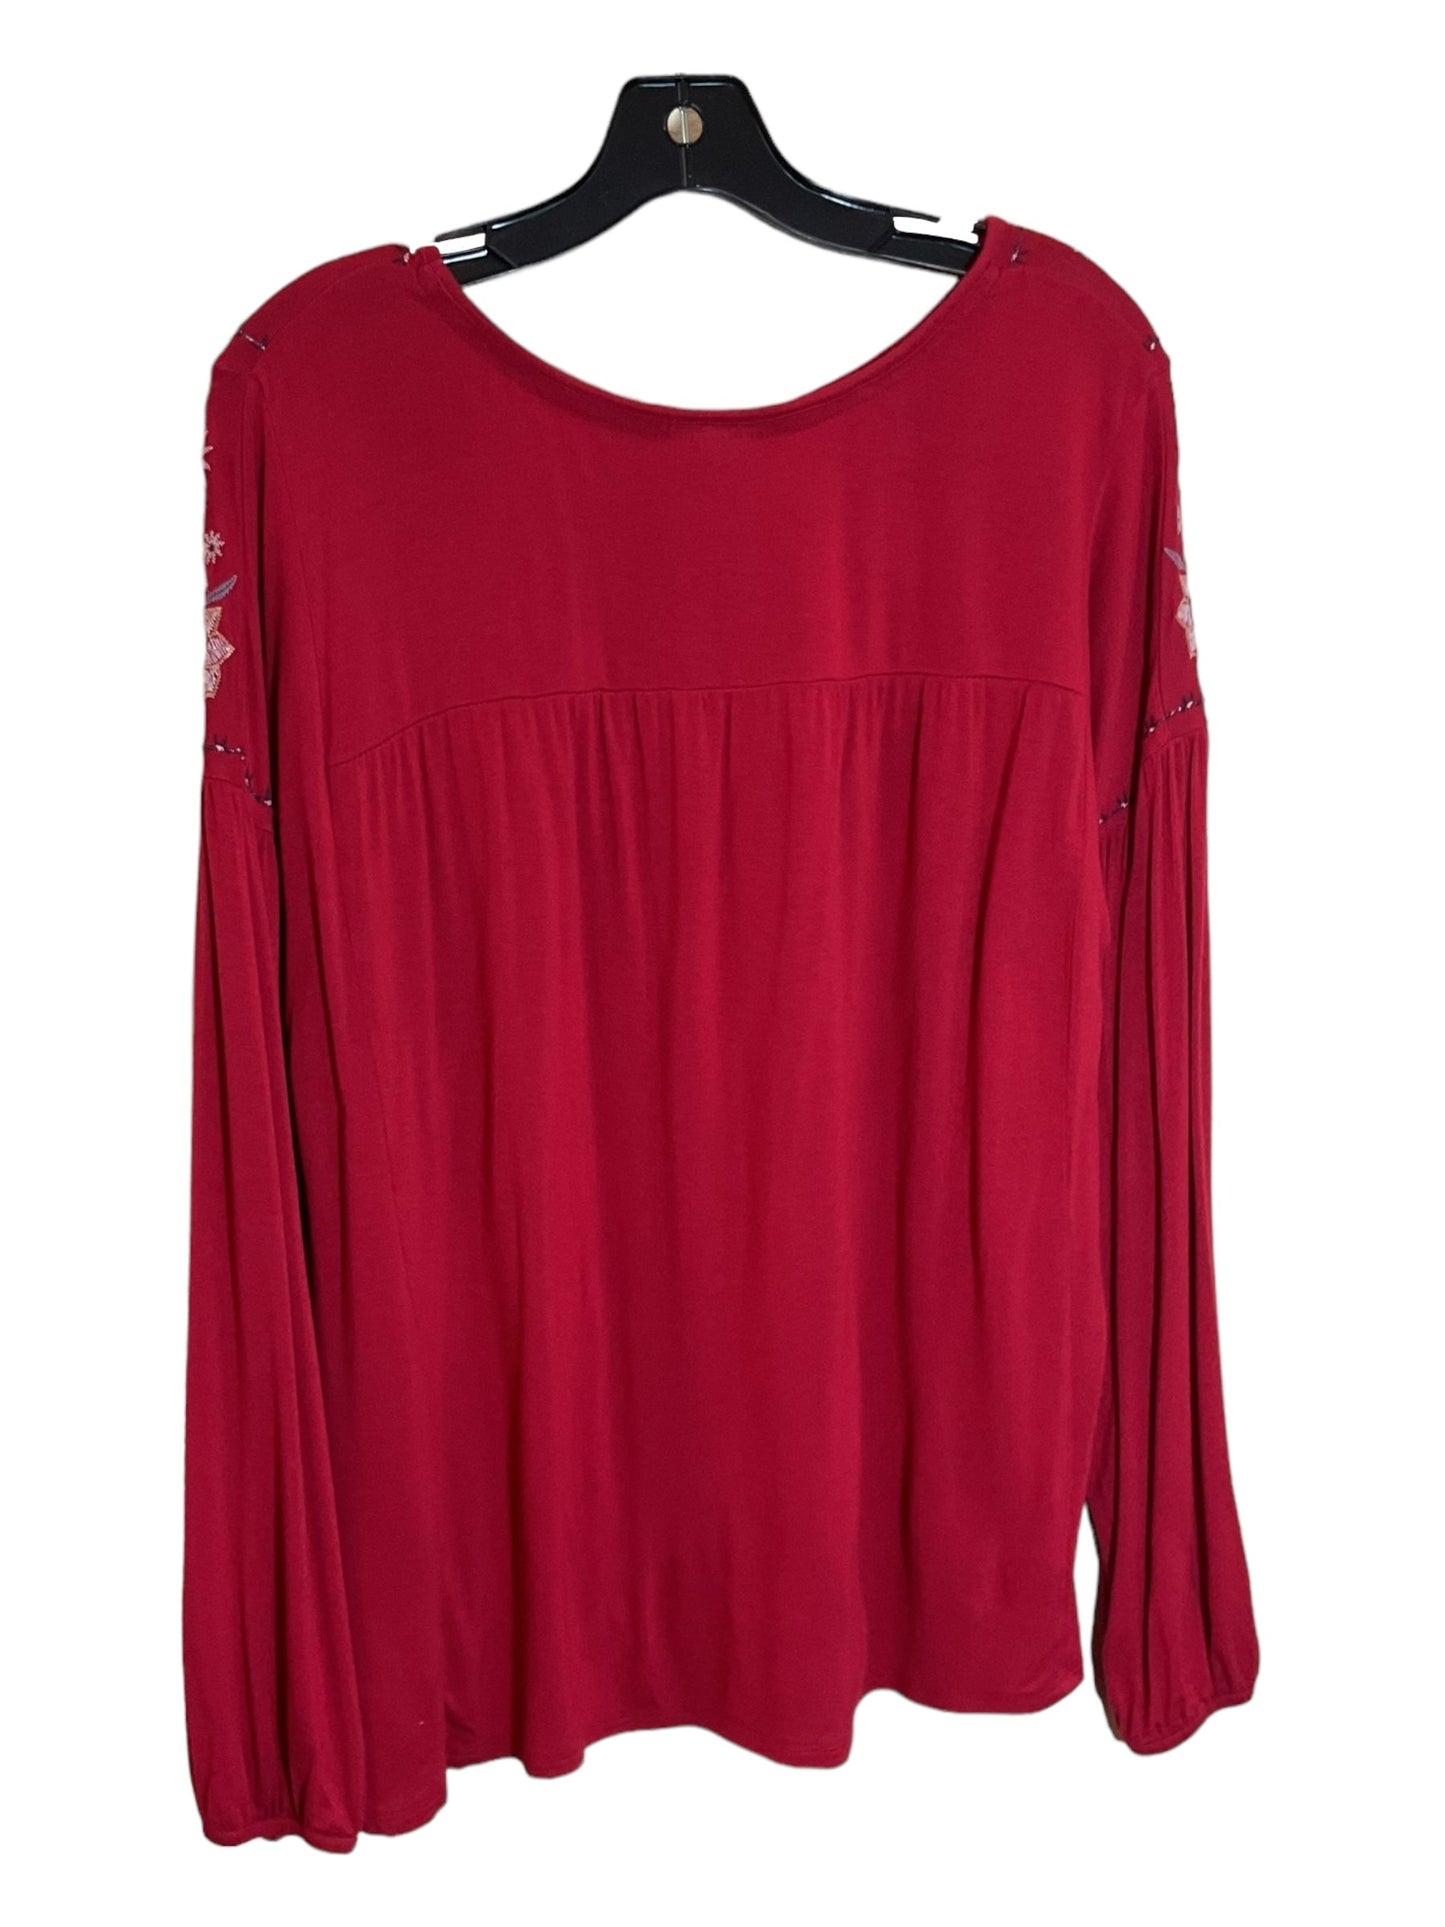 Red Top Long Sleeve Knox Rose, Size L